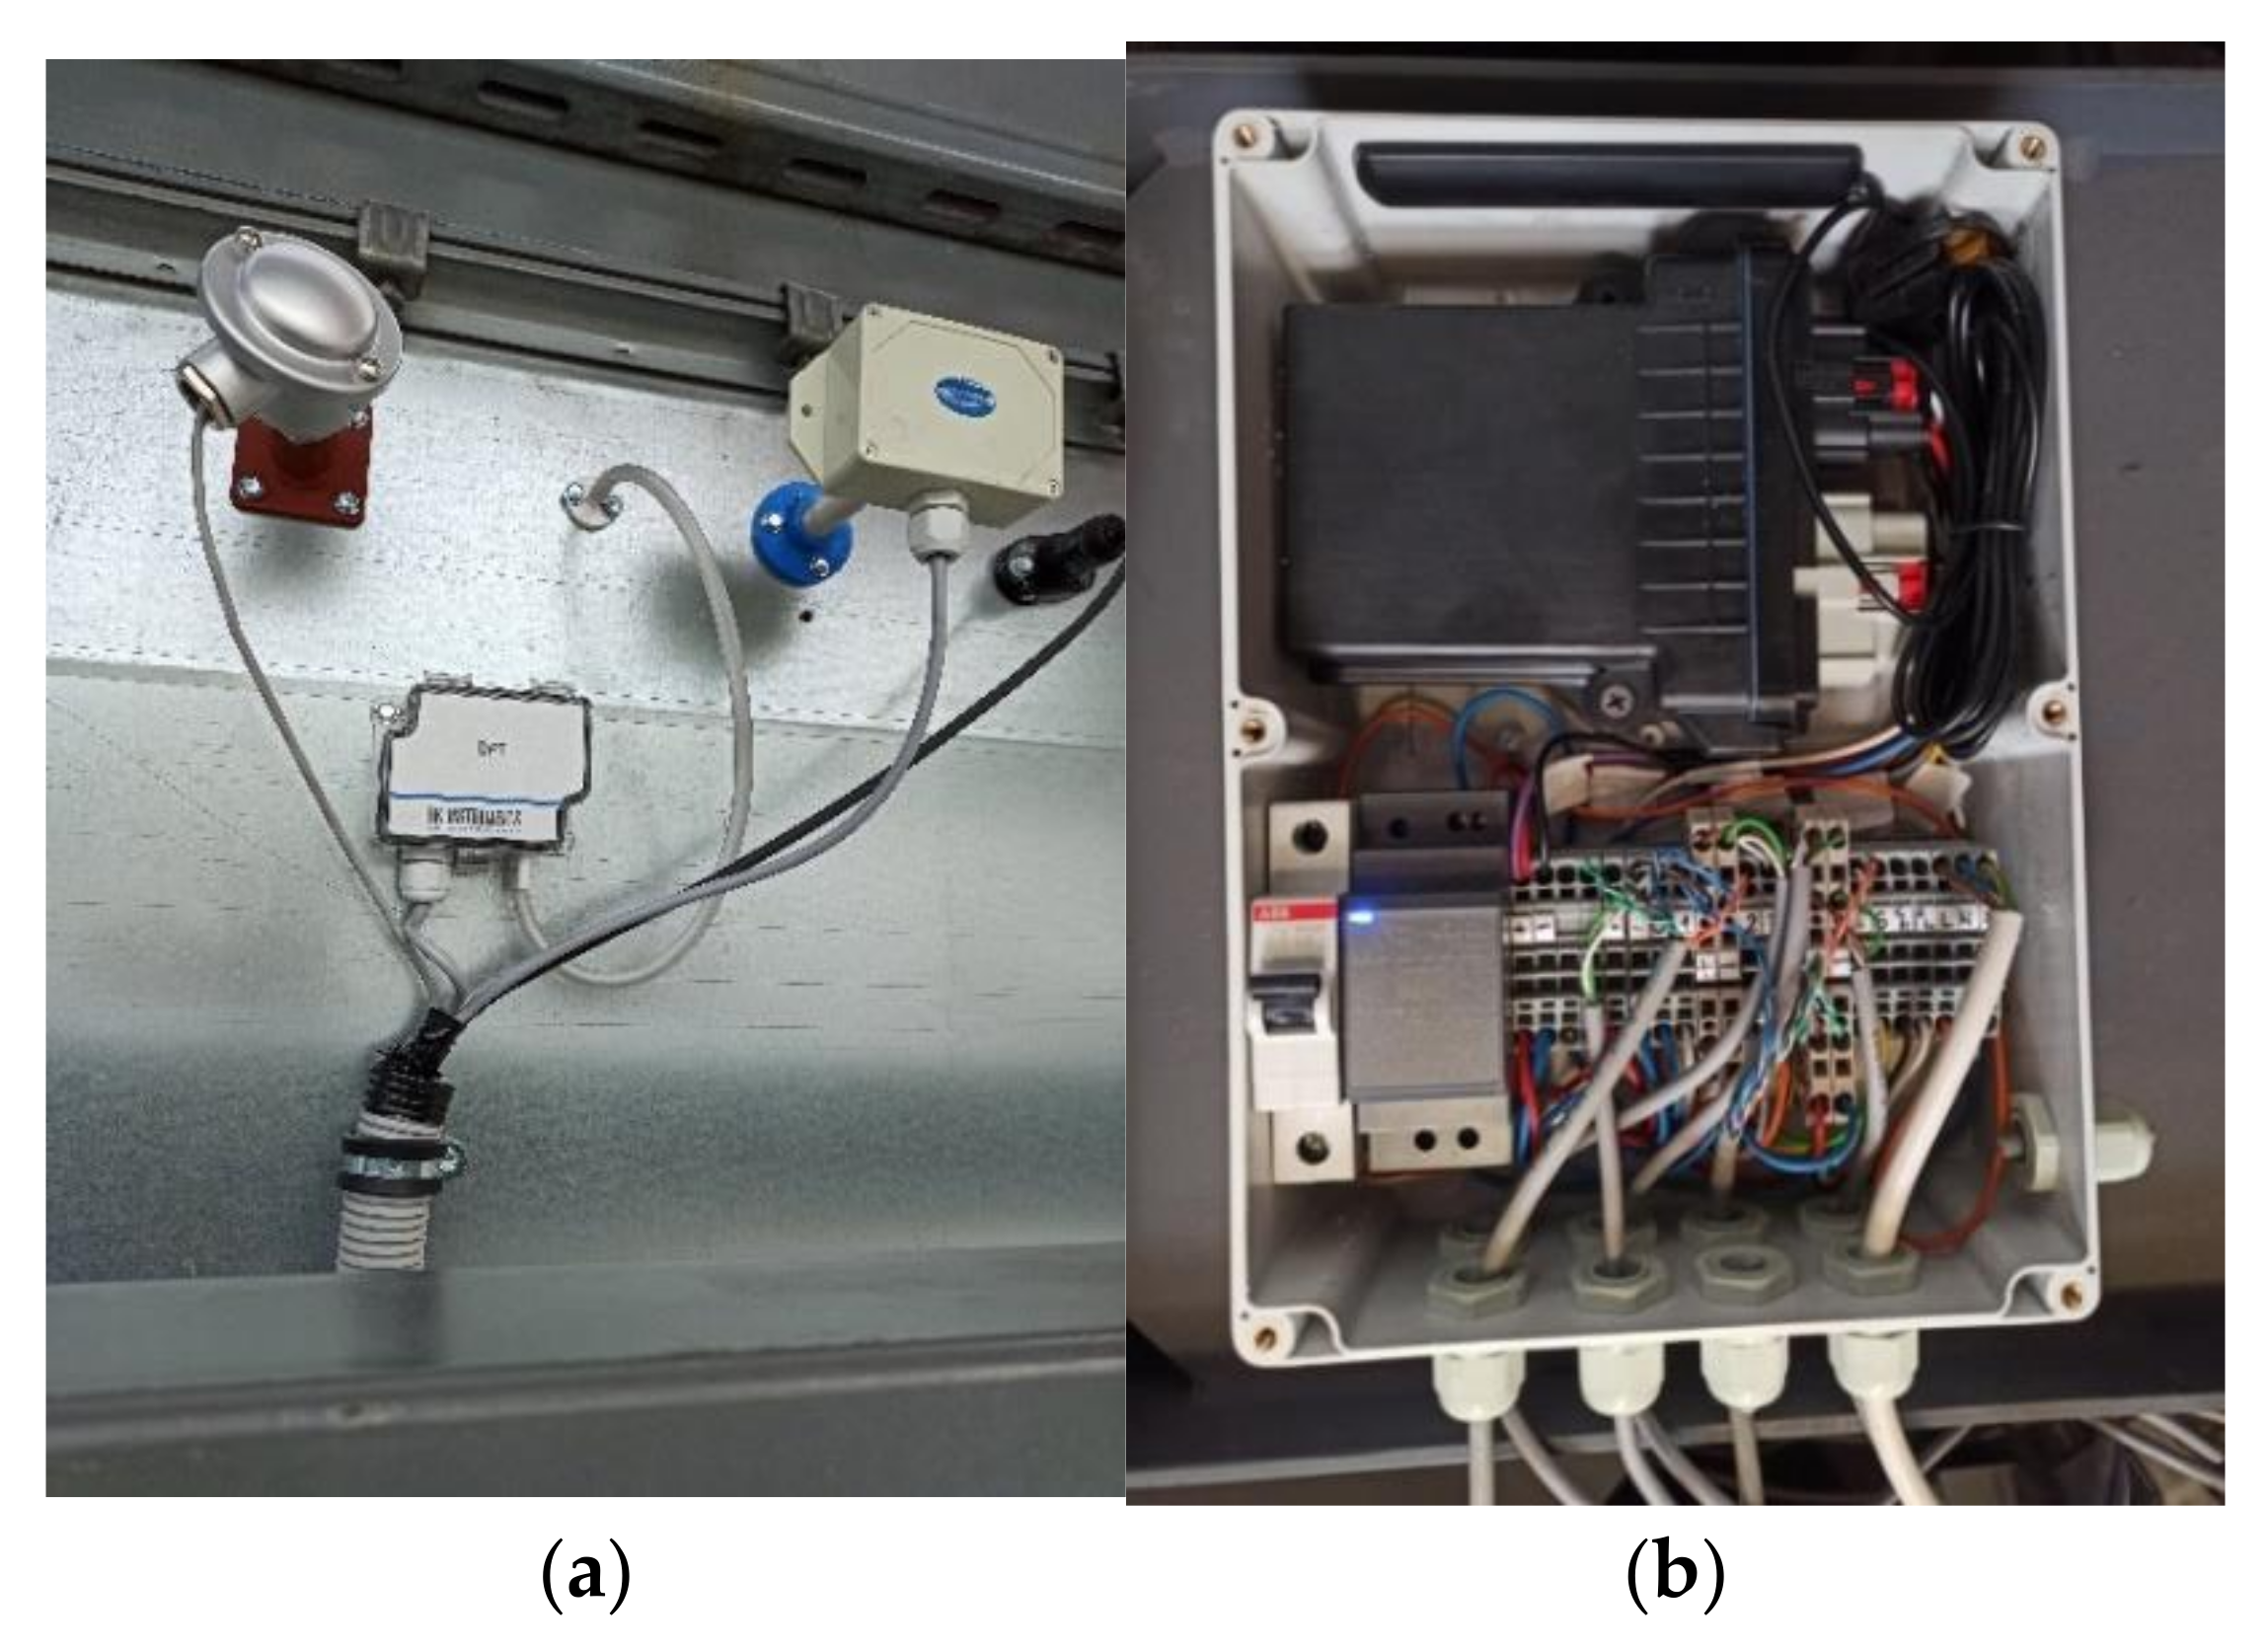 Energies | Free Full-Text | Towards Designing an Innovative Industrial Fan:  Developing Regression and Neural Models Based on Remote Mass Measurements